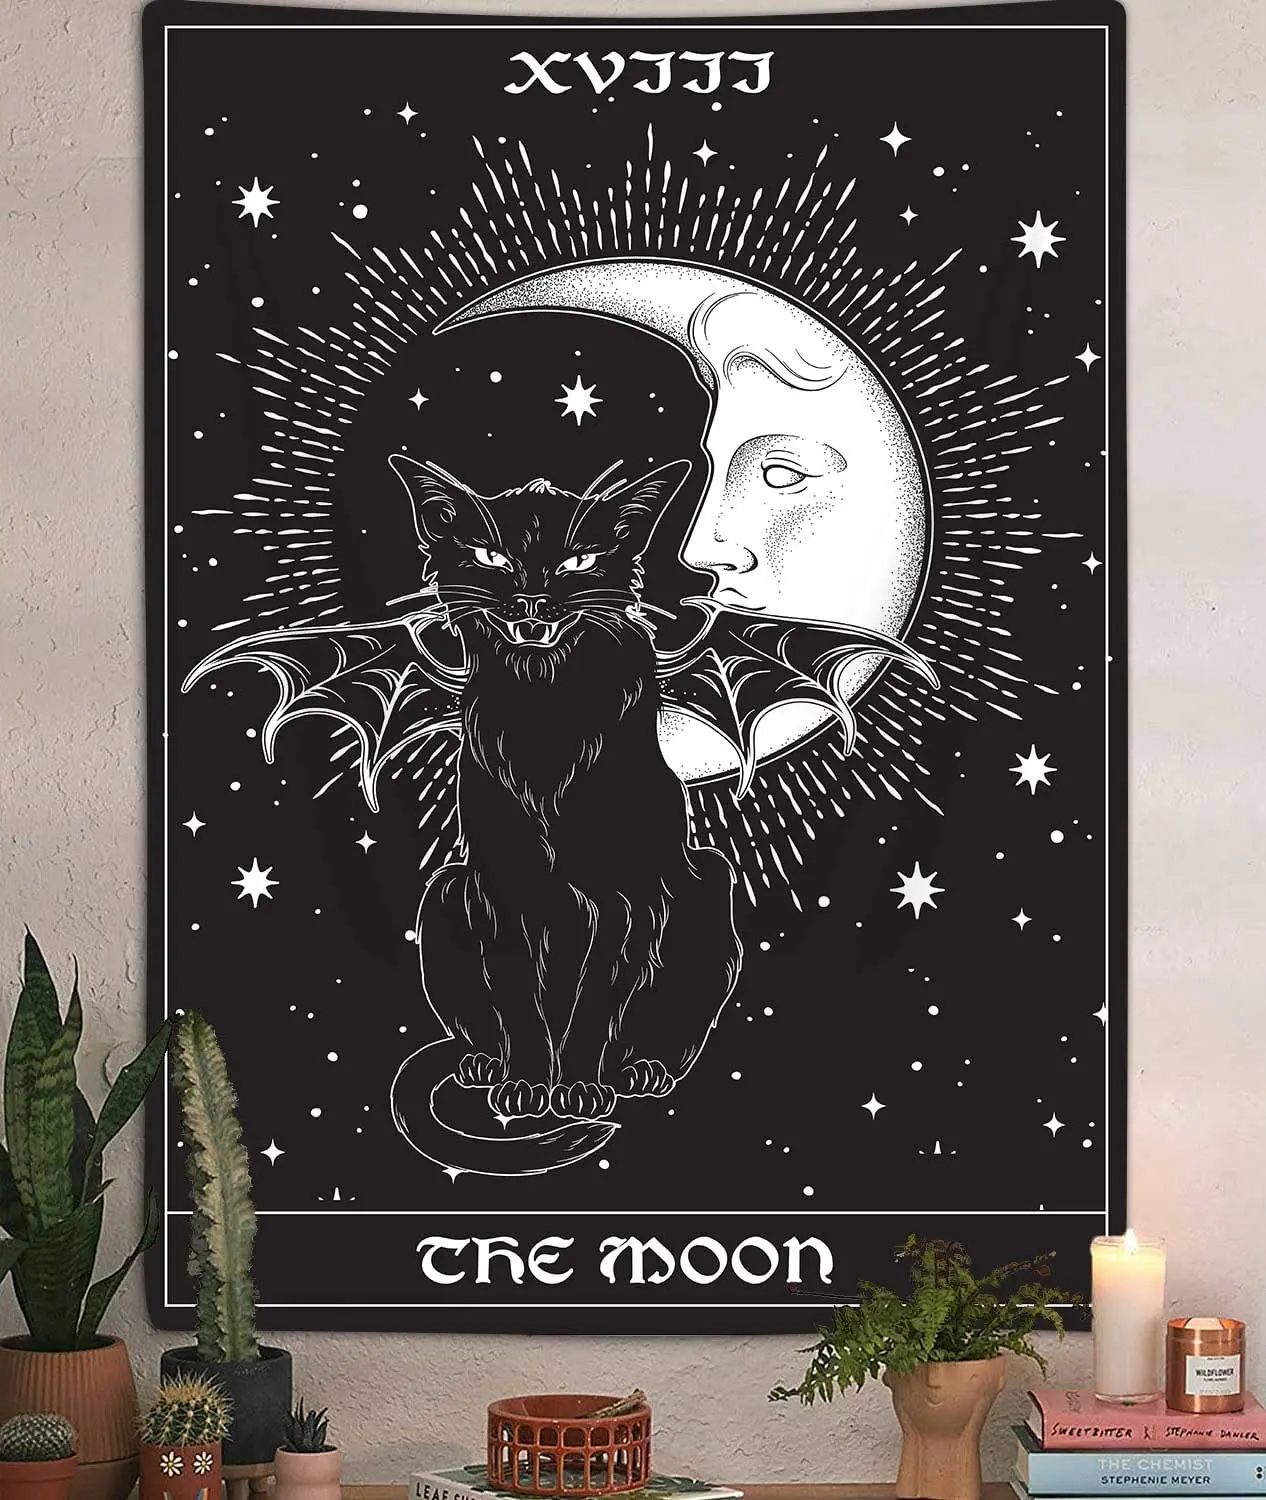 The Moon Tarot Tapestry Wall Hanging Gothic Black Cat Pagan Witchcraft Bohemian Wall Art Tapestry for Bedroom Living Home Decor